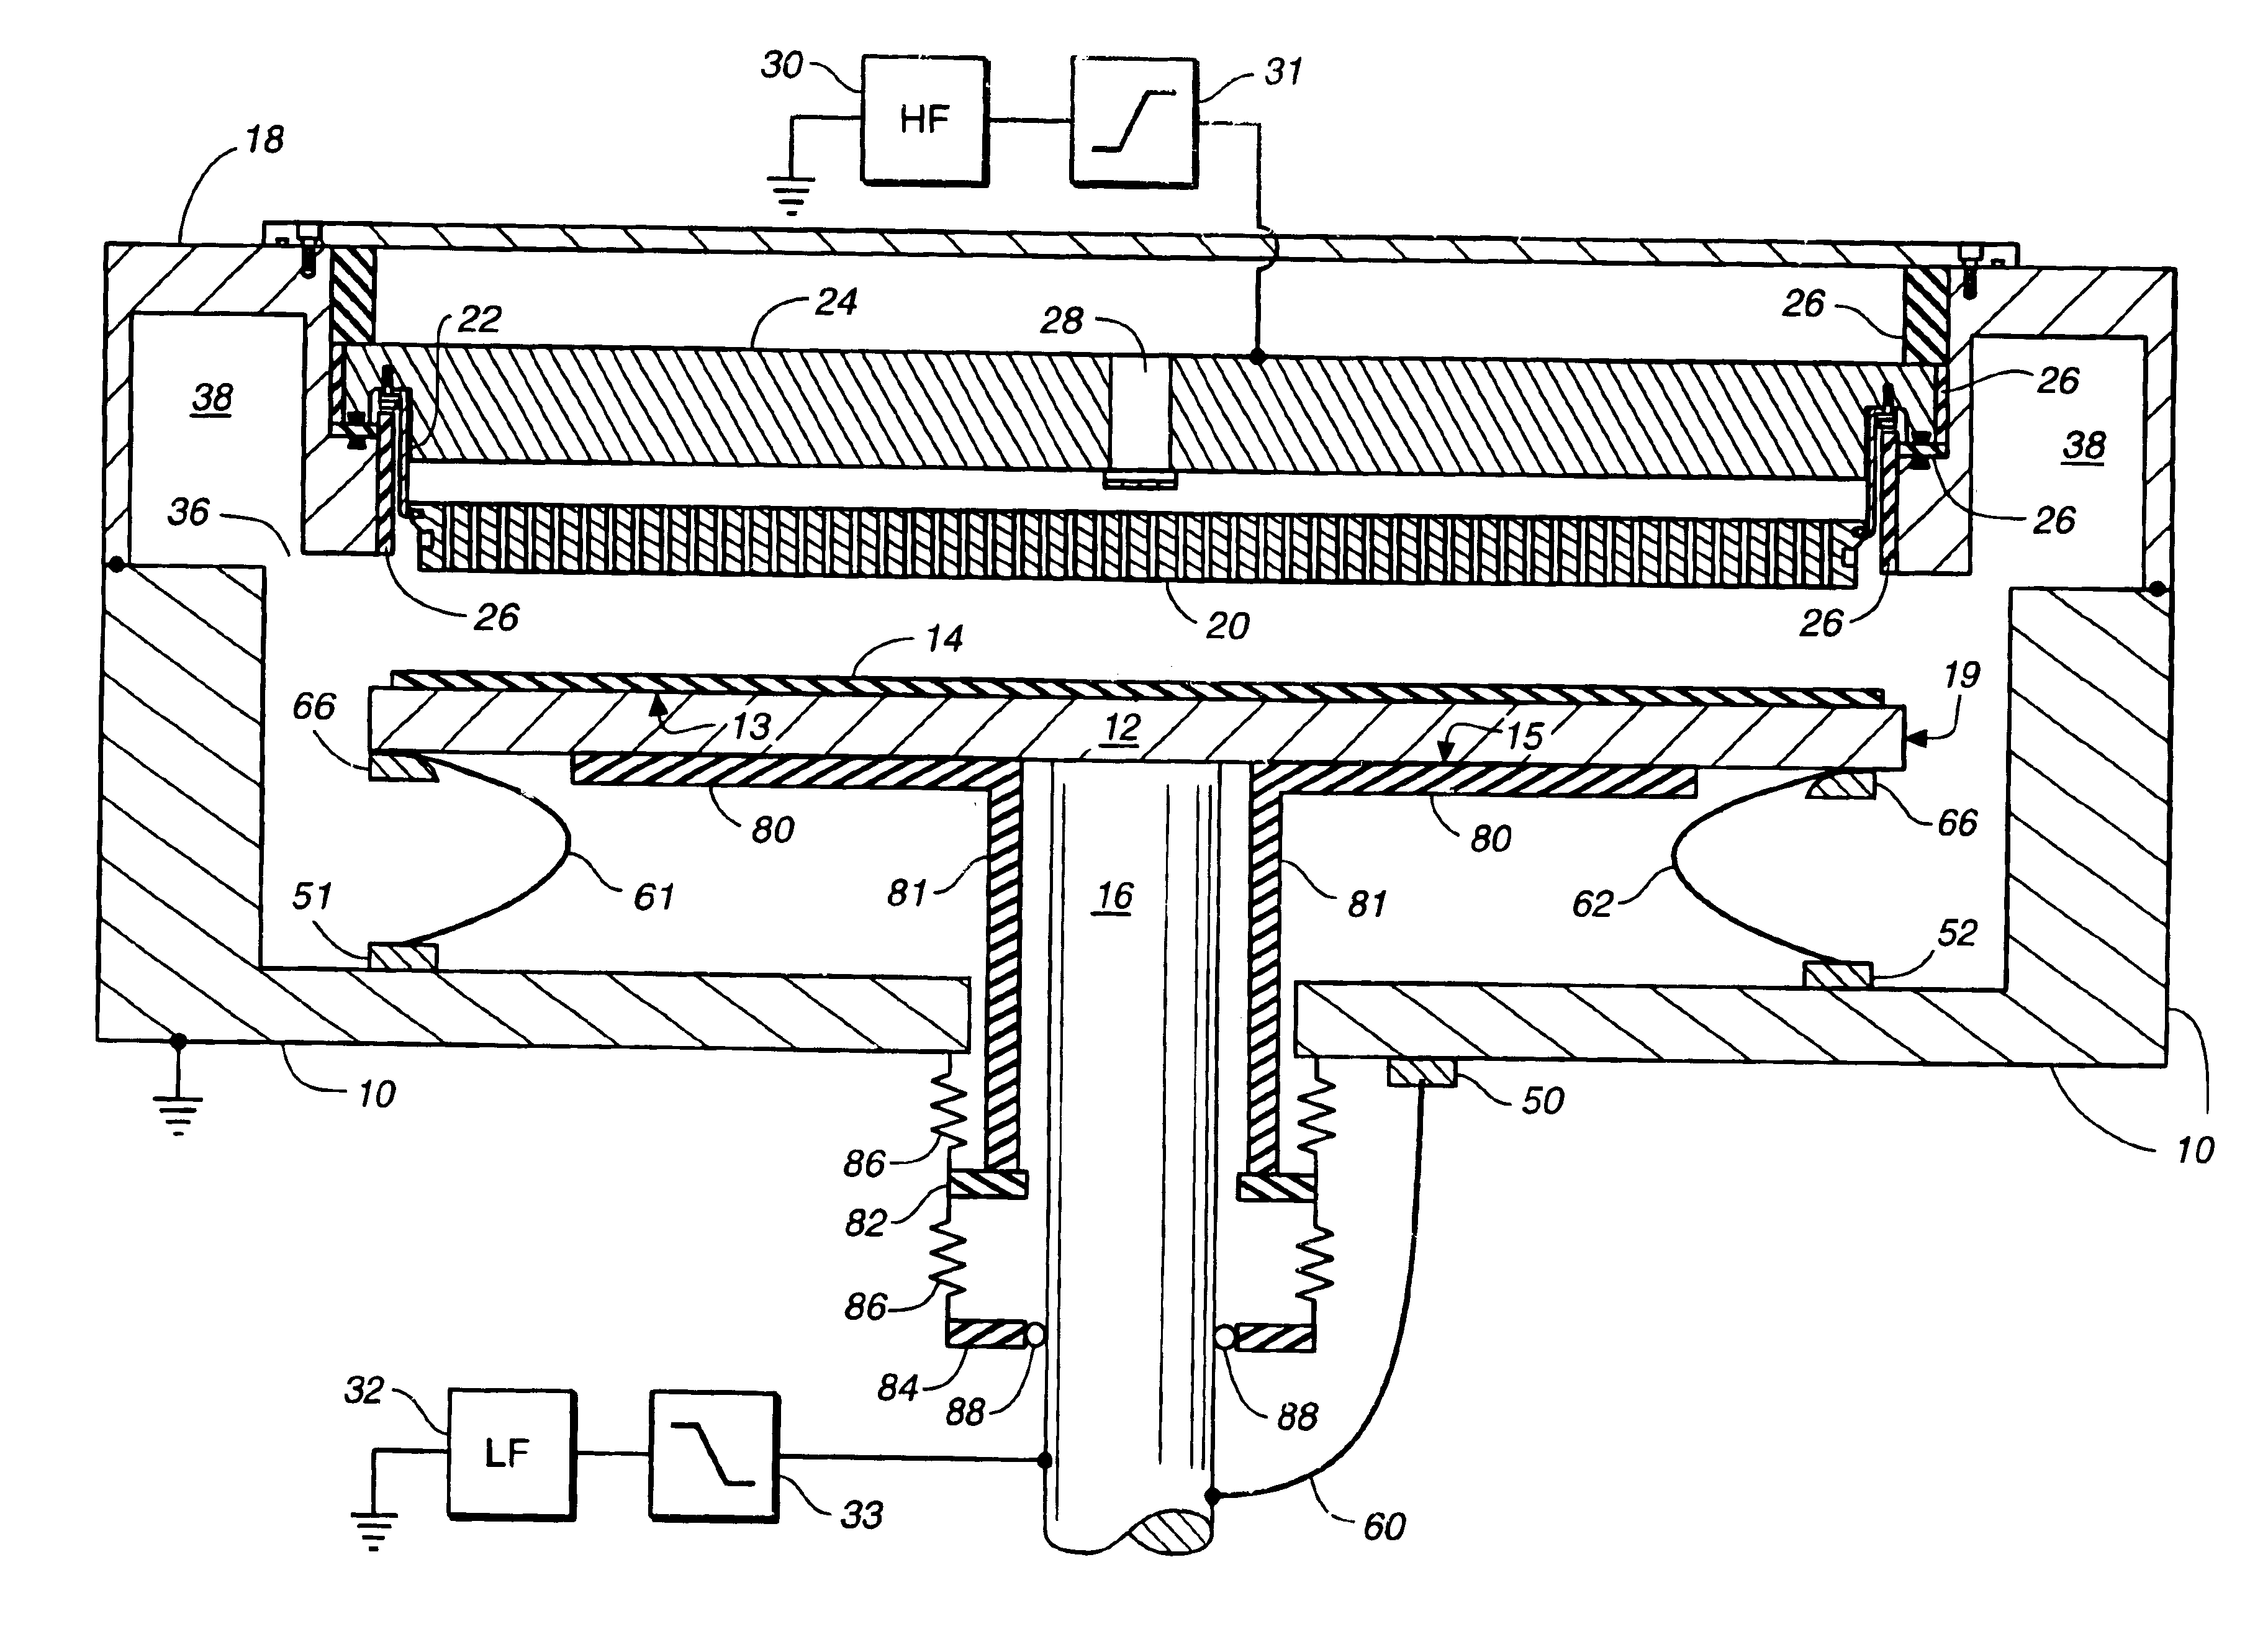 Multiple frequency plasma chamber with grounding capacitor at cathode